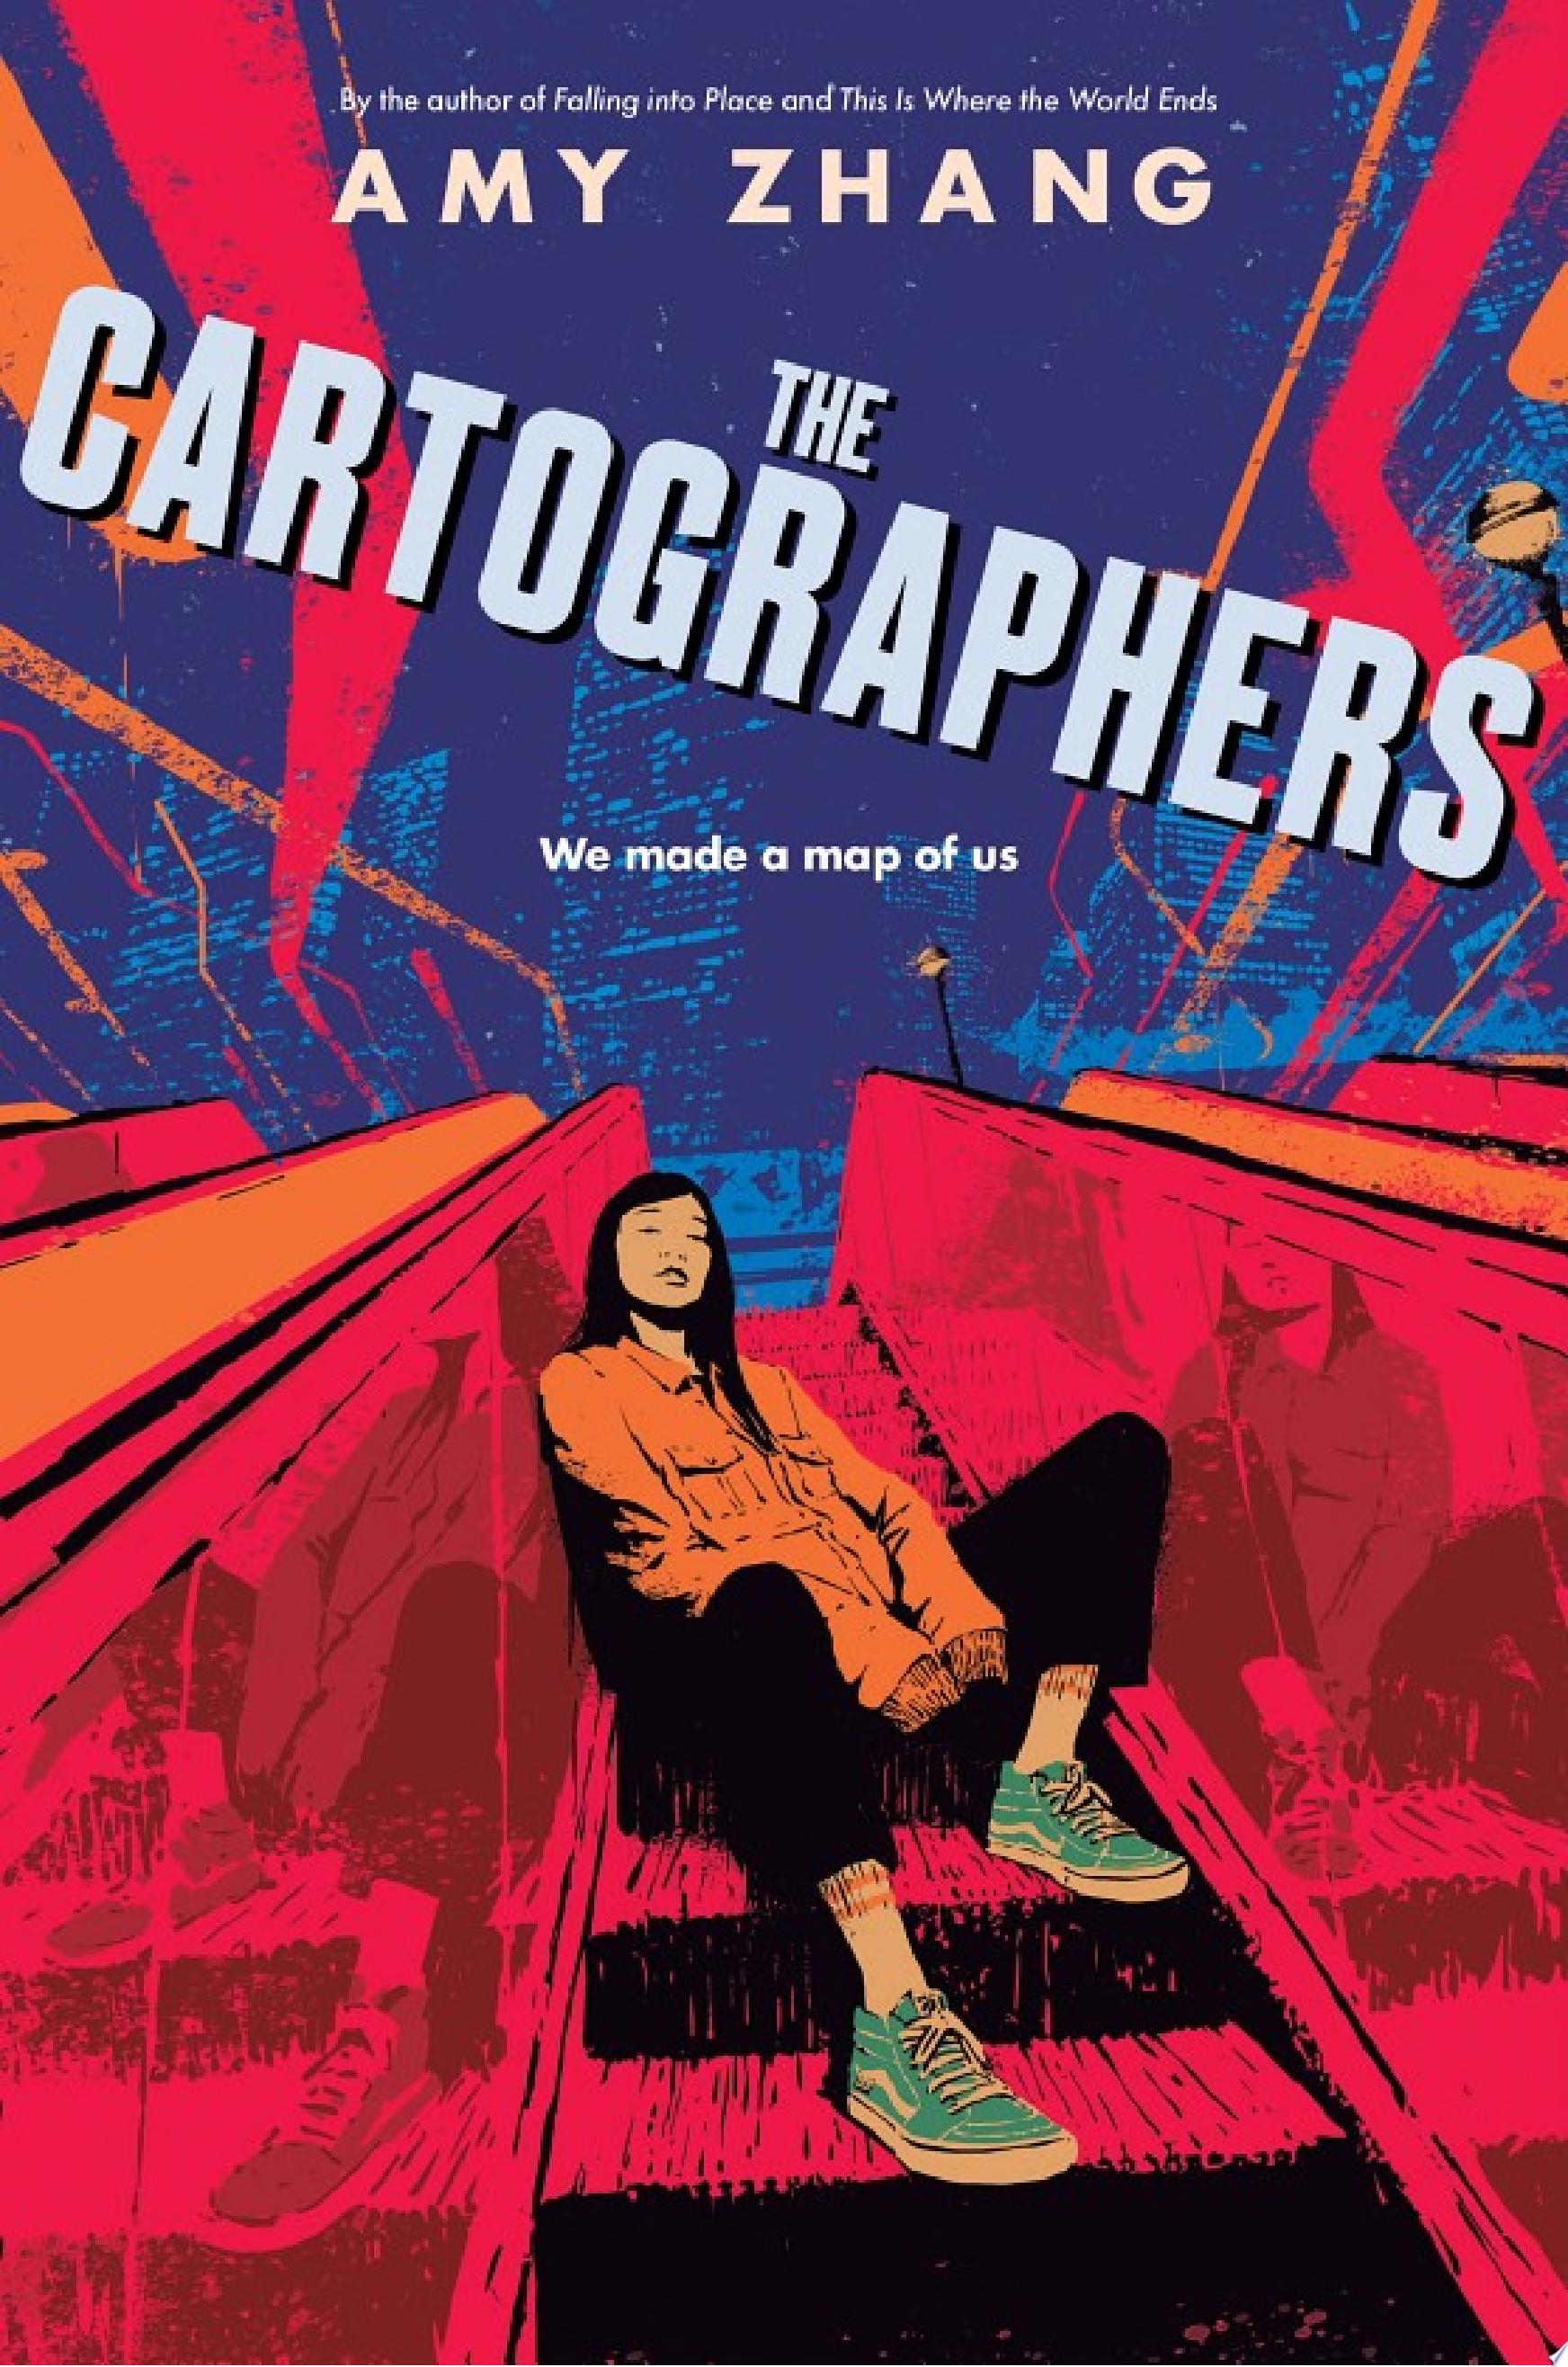 Image for "The Cartographers"